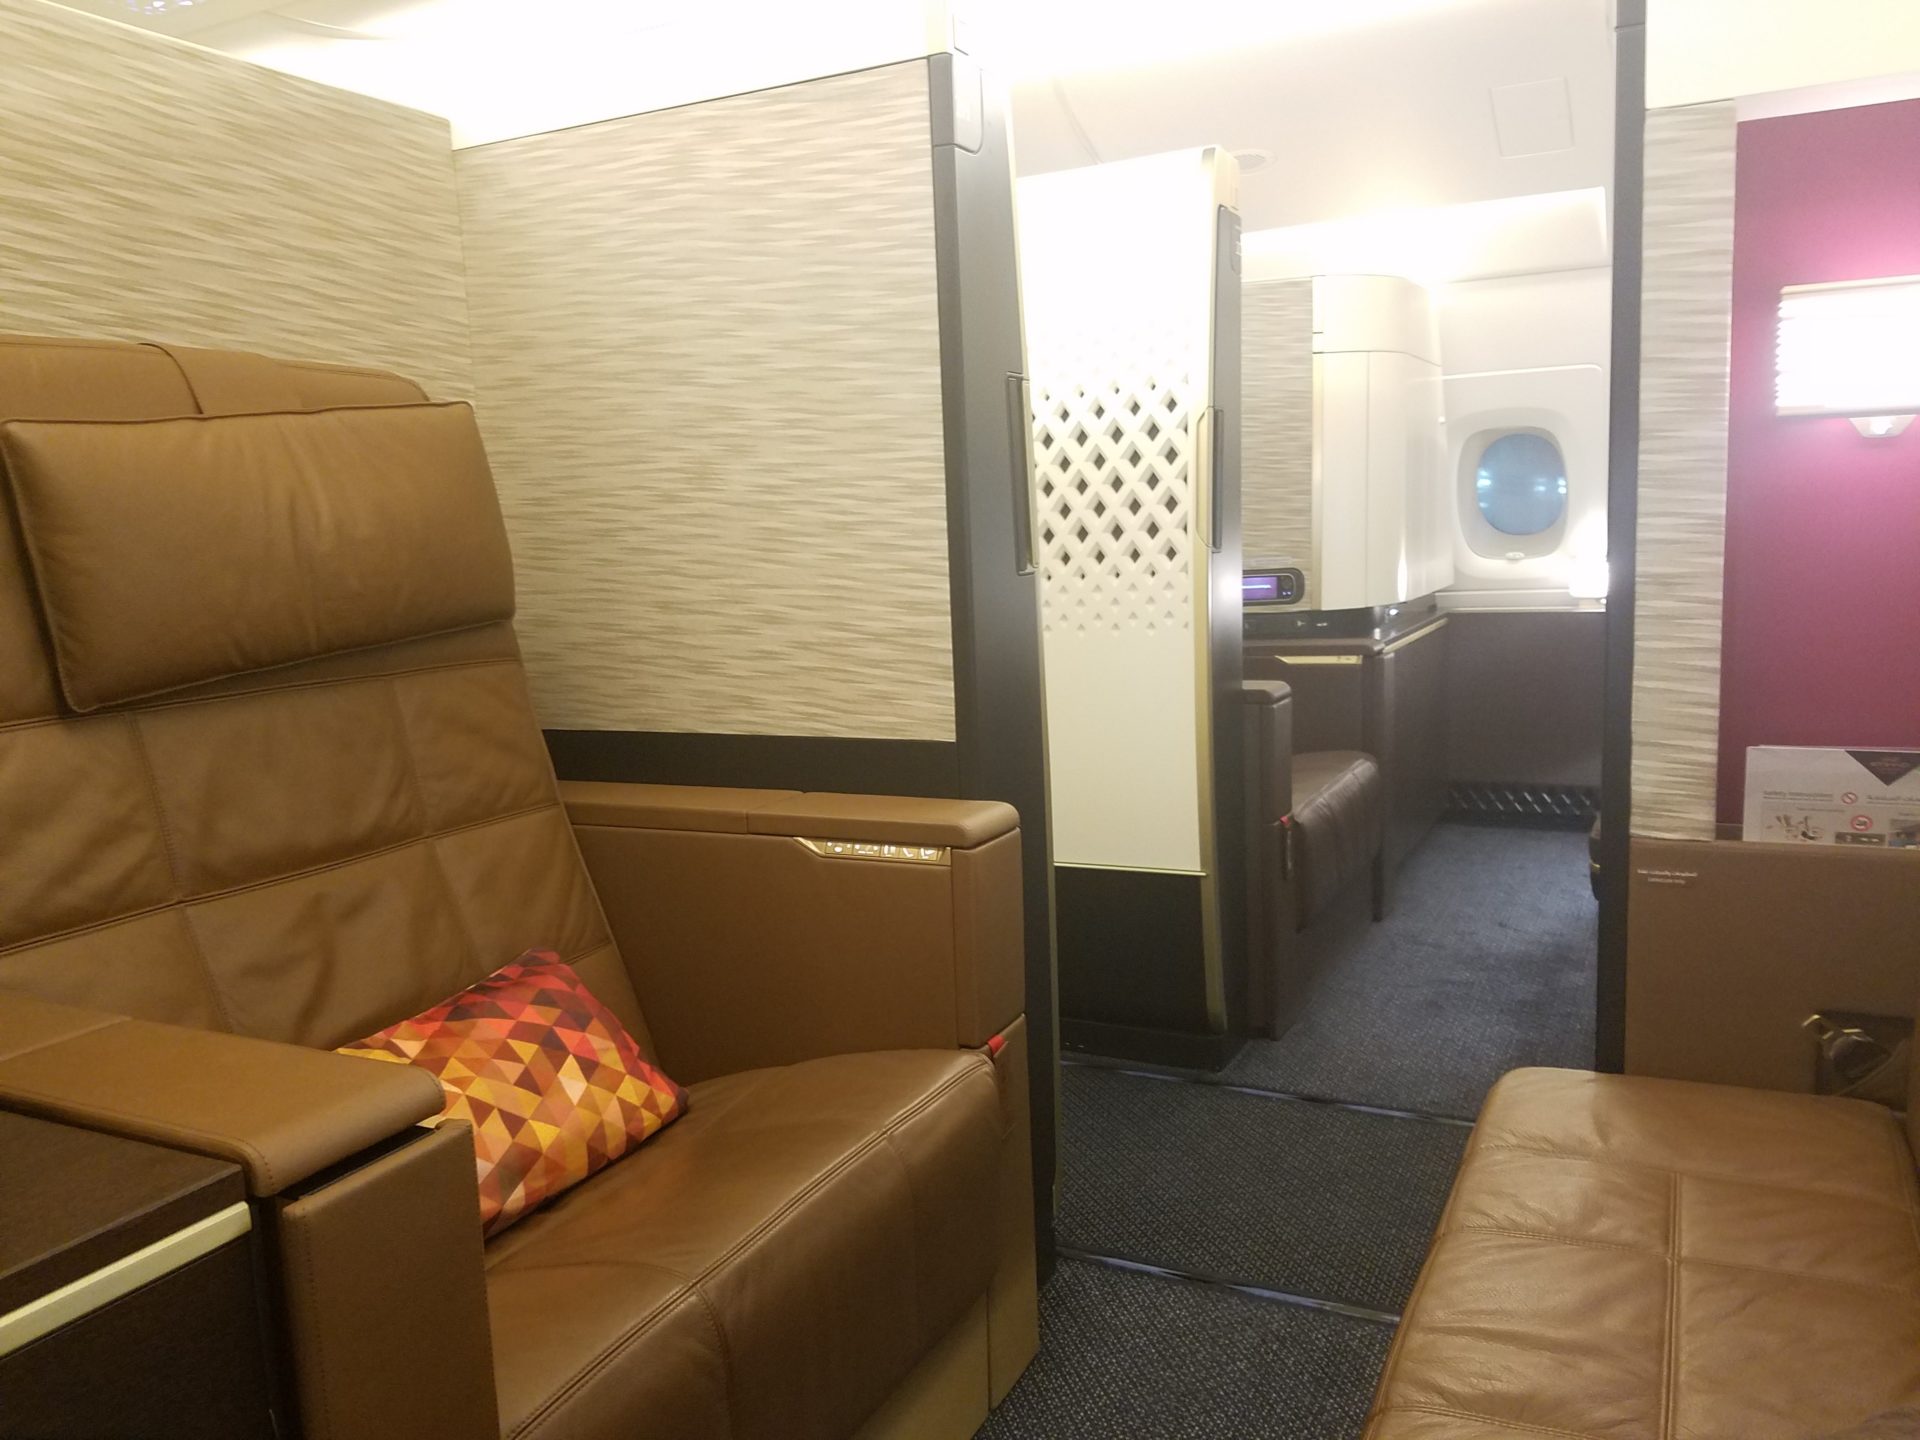 a brown leather couch in a plane